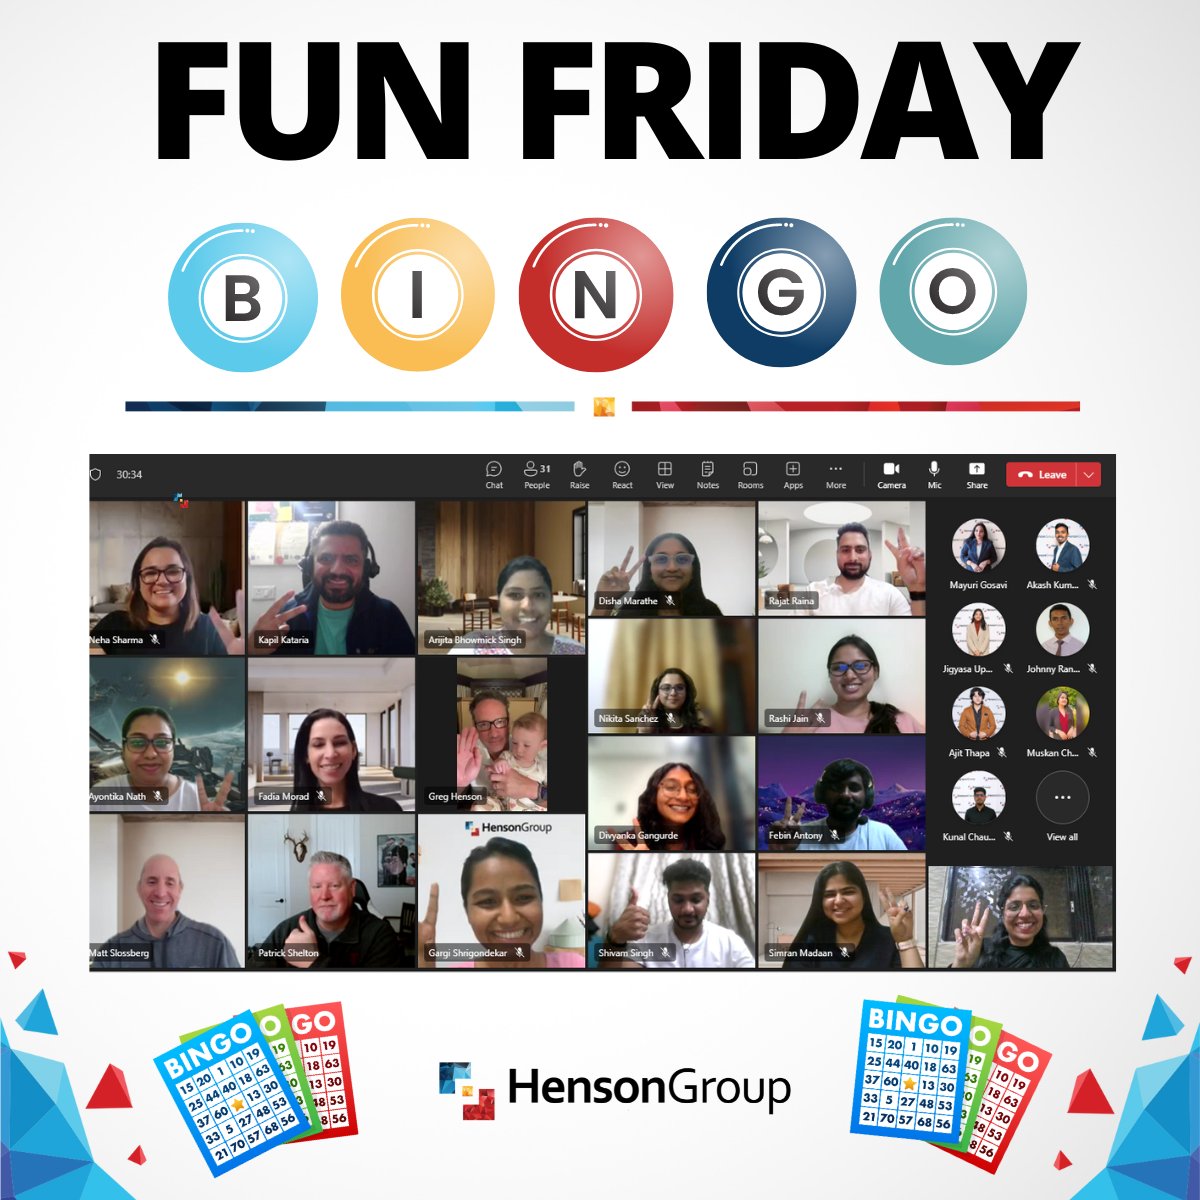 Tasks to Complete: Filling Your Bingo Card ☑️

We had such an exciting Henson Group Fun Friday last week 🌟

Our outstanding #TeamOnAMission met to connect, laugh, and win together! 🎯 

Congrats to all of our HG BINGO Champs 🤩🏆

#HensonTeamBonding #WorkHardPlayHarder